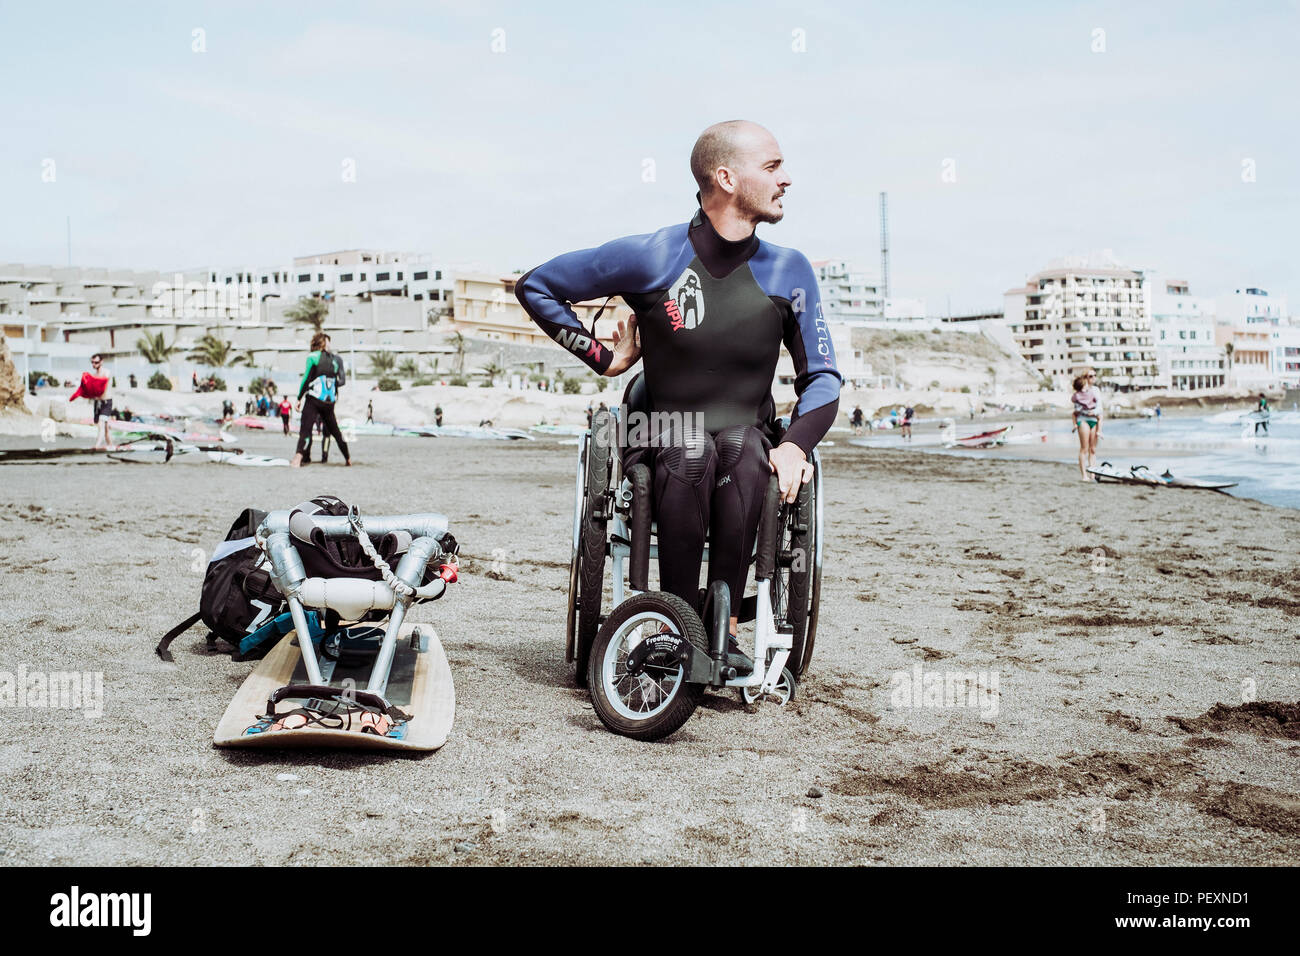 Male disabled kitesurfer in wetsuit on beach, Tenerife, Canary Islands, Spain Stock Photo